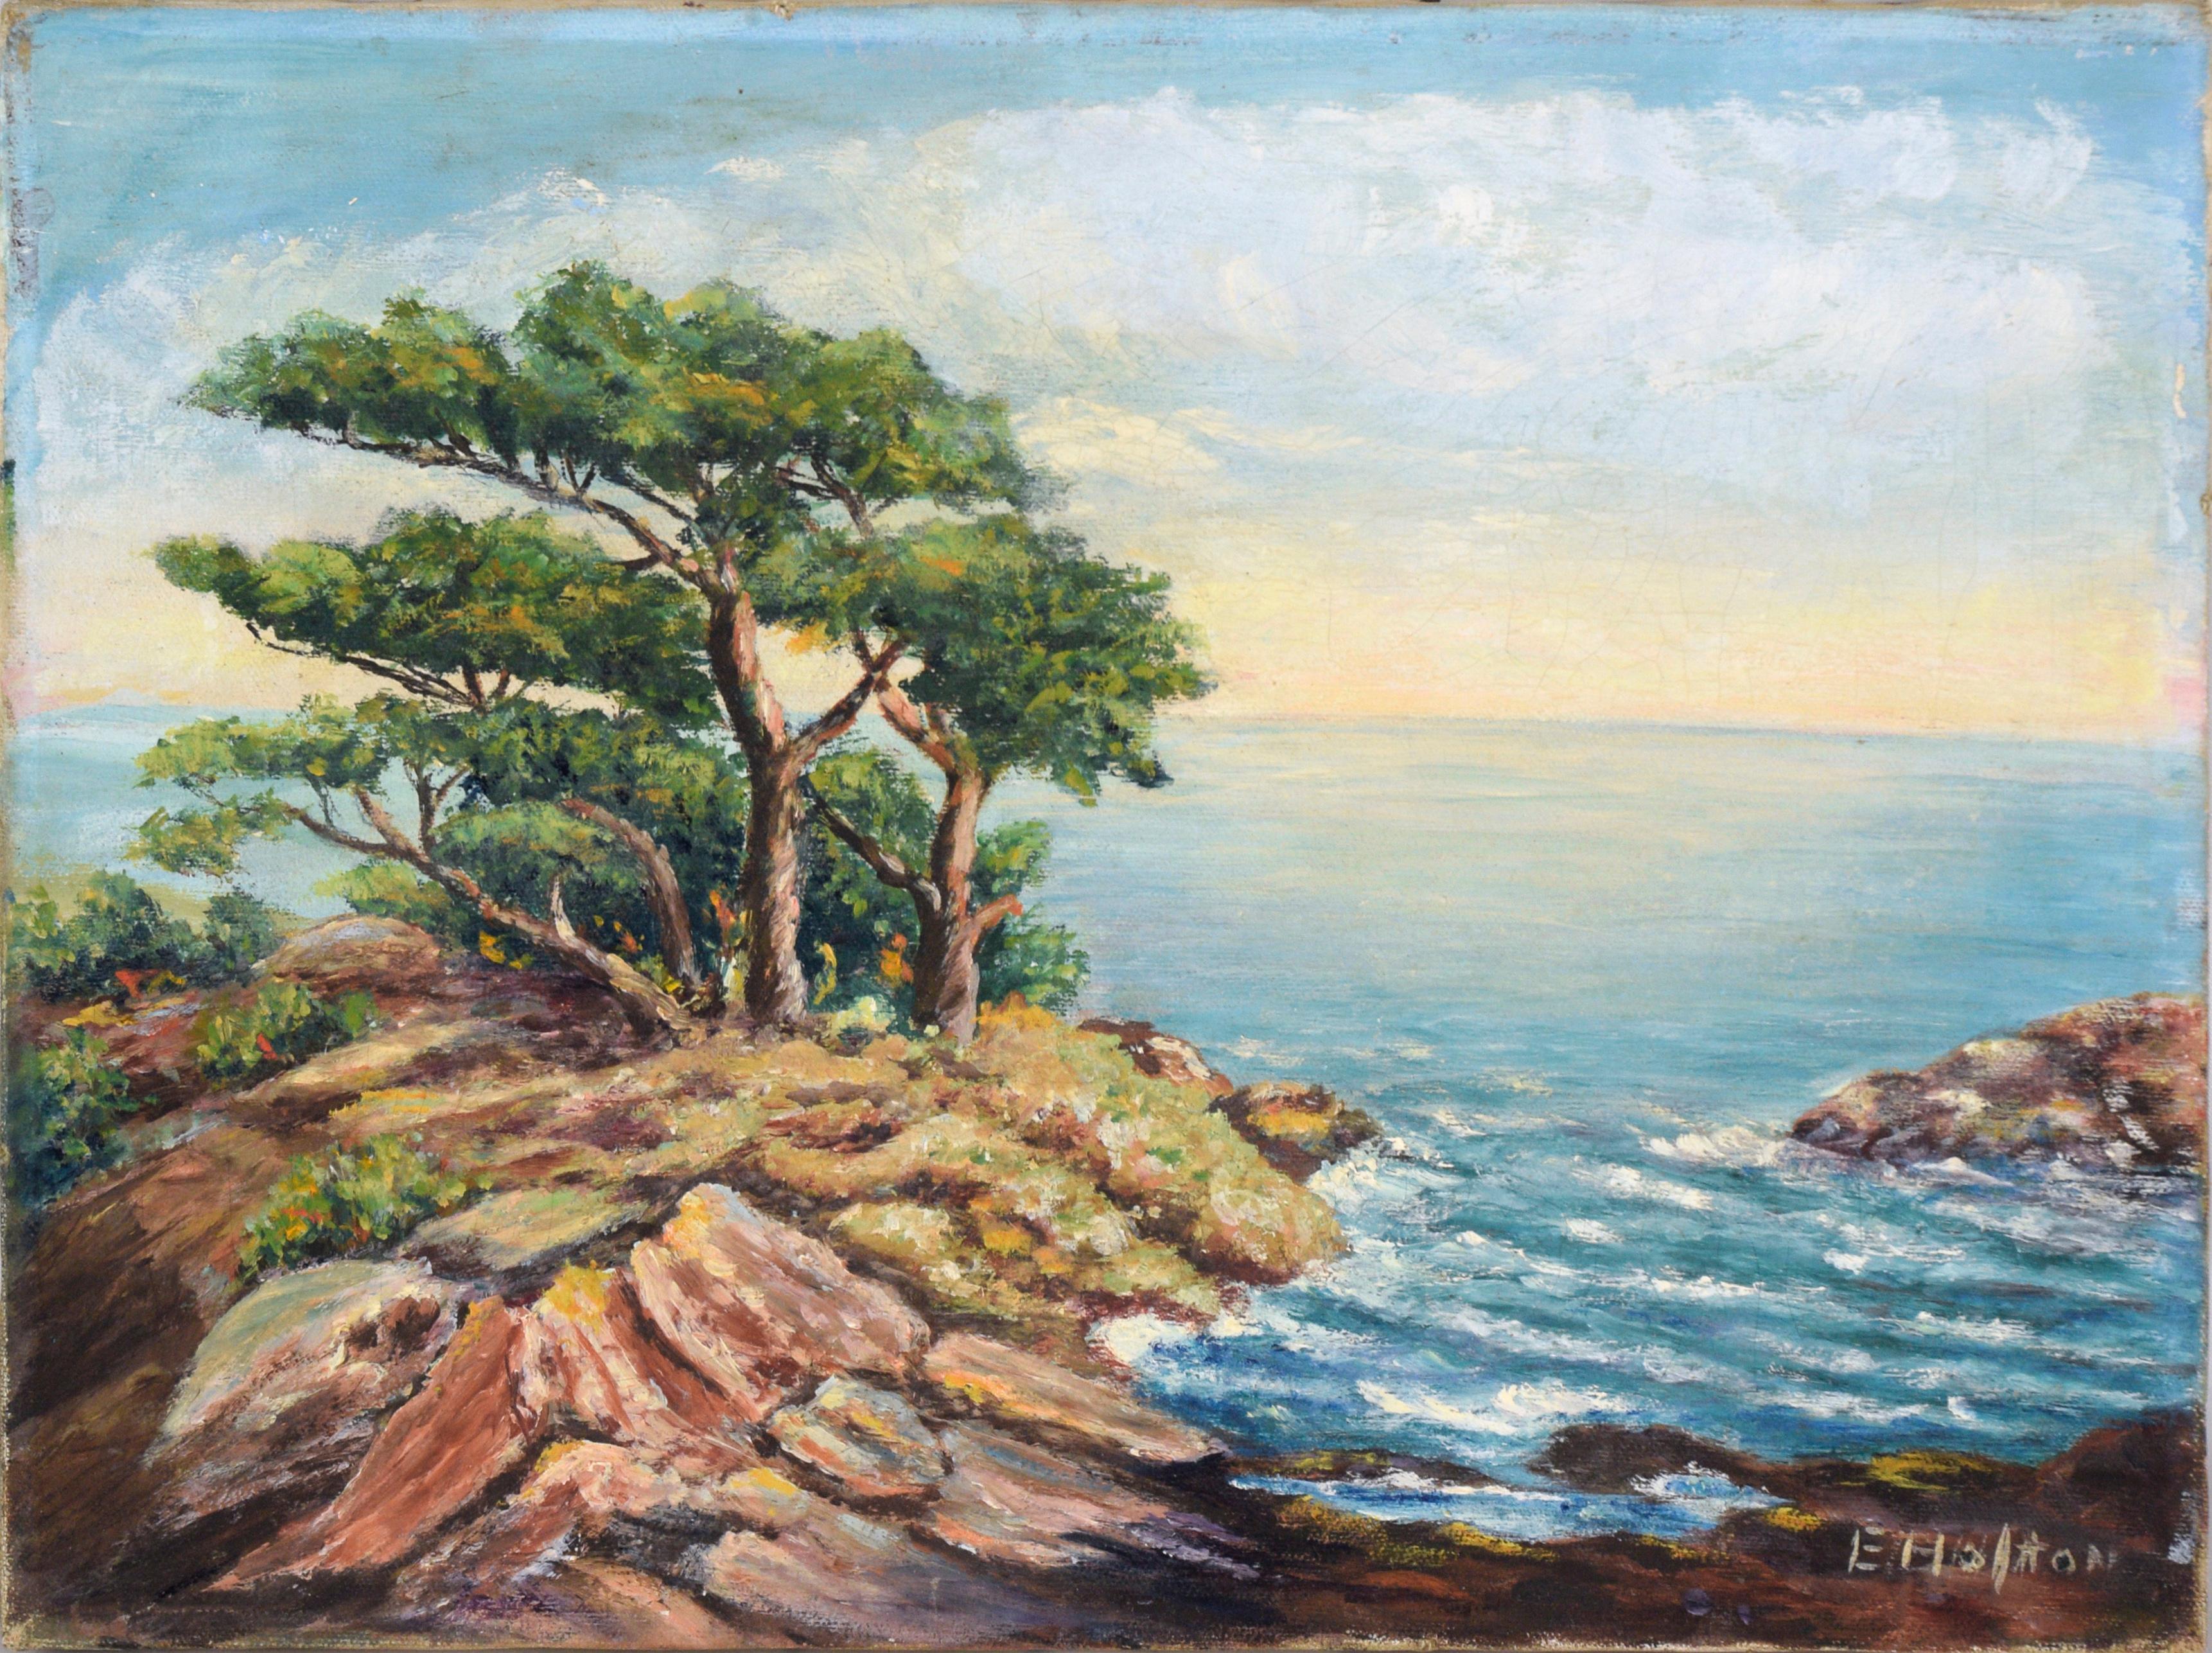 E Holton Landscape Painting - Monterey Cypress - Carmel by the Sea California Seascape in Oil on Canvas